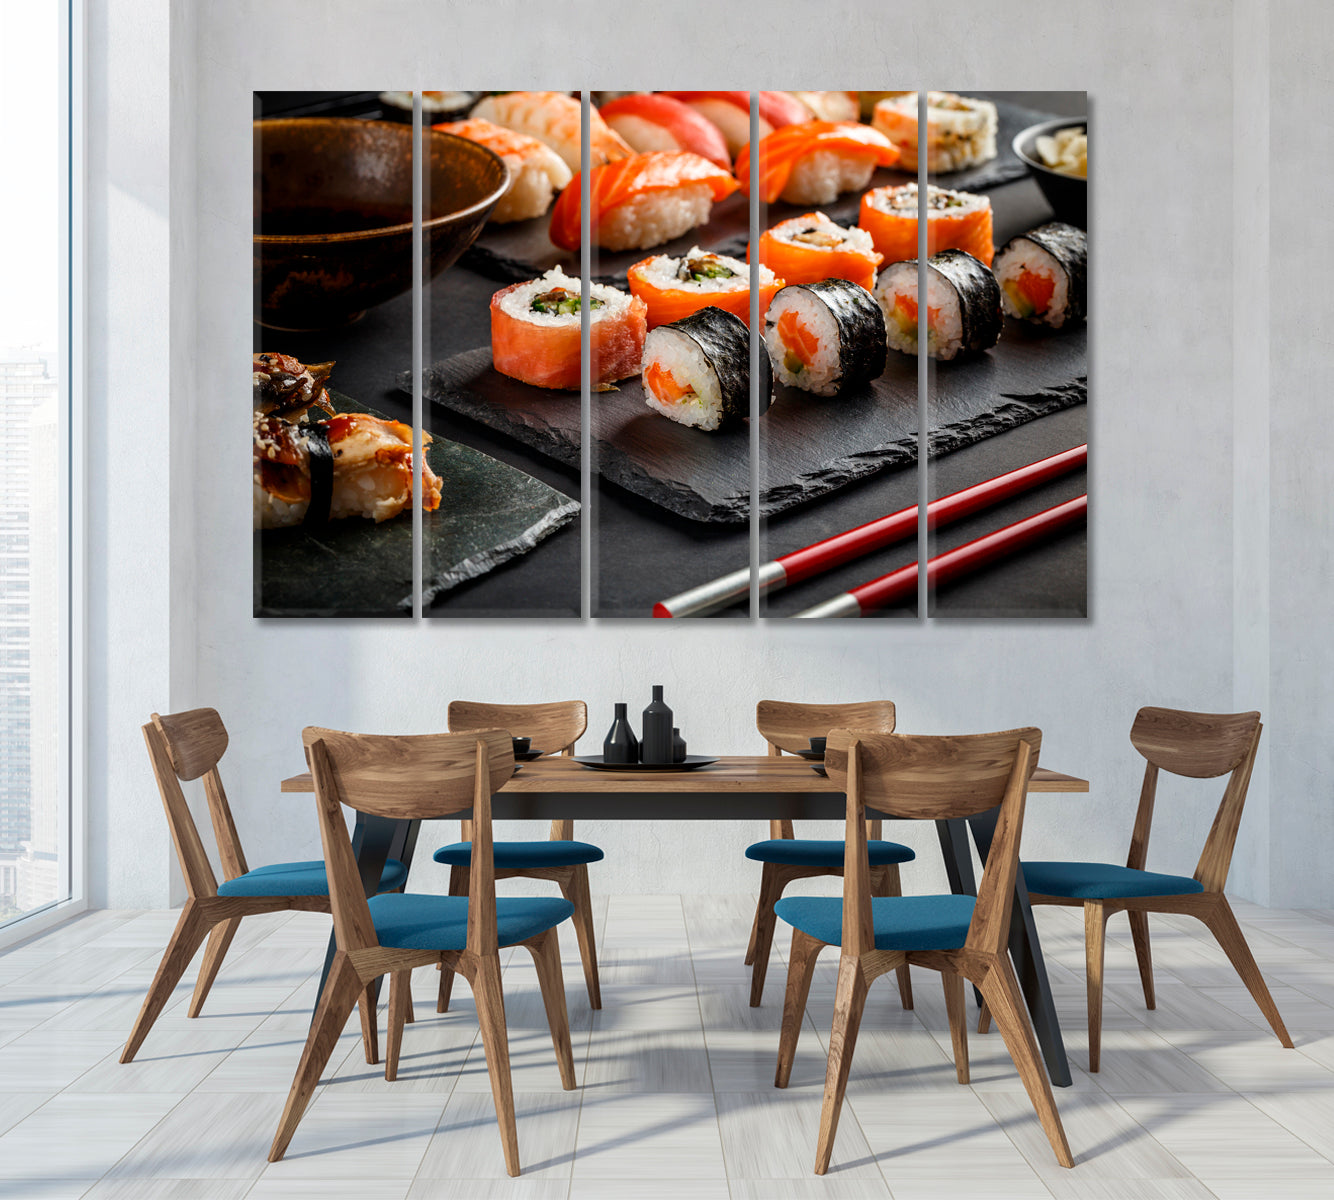 Different Kinds of Sushi Rolls Canvas Print-Canvas Print-CetArt-1 Panel-24x16 inches-CetArt